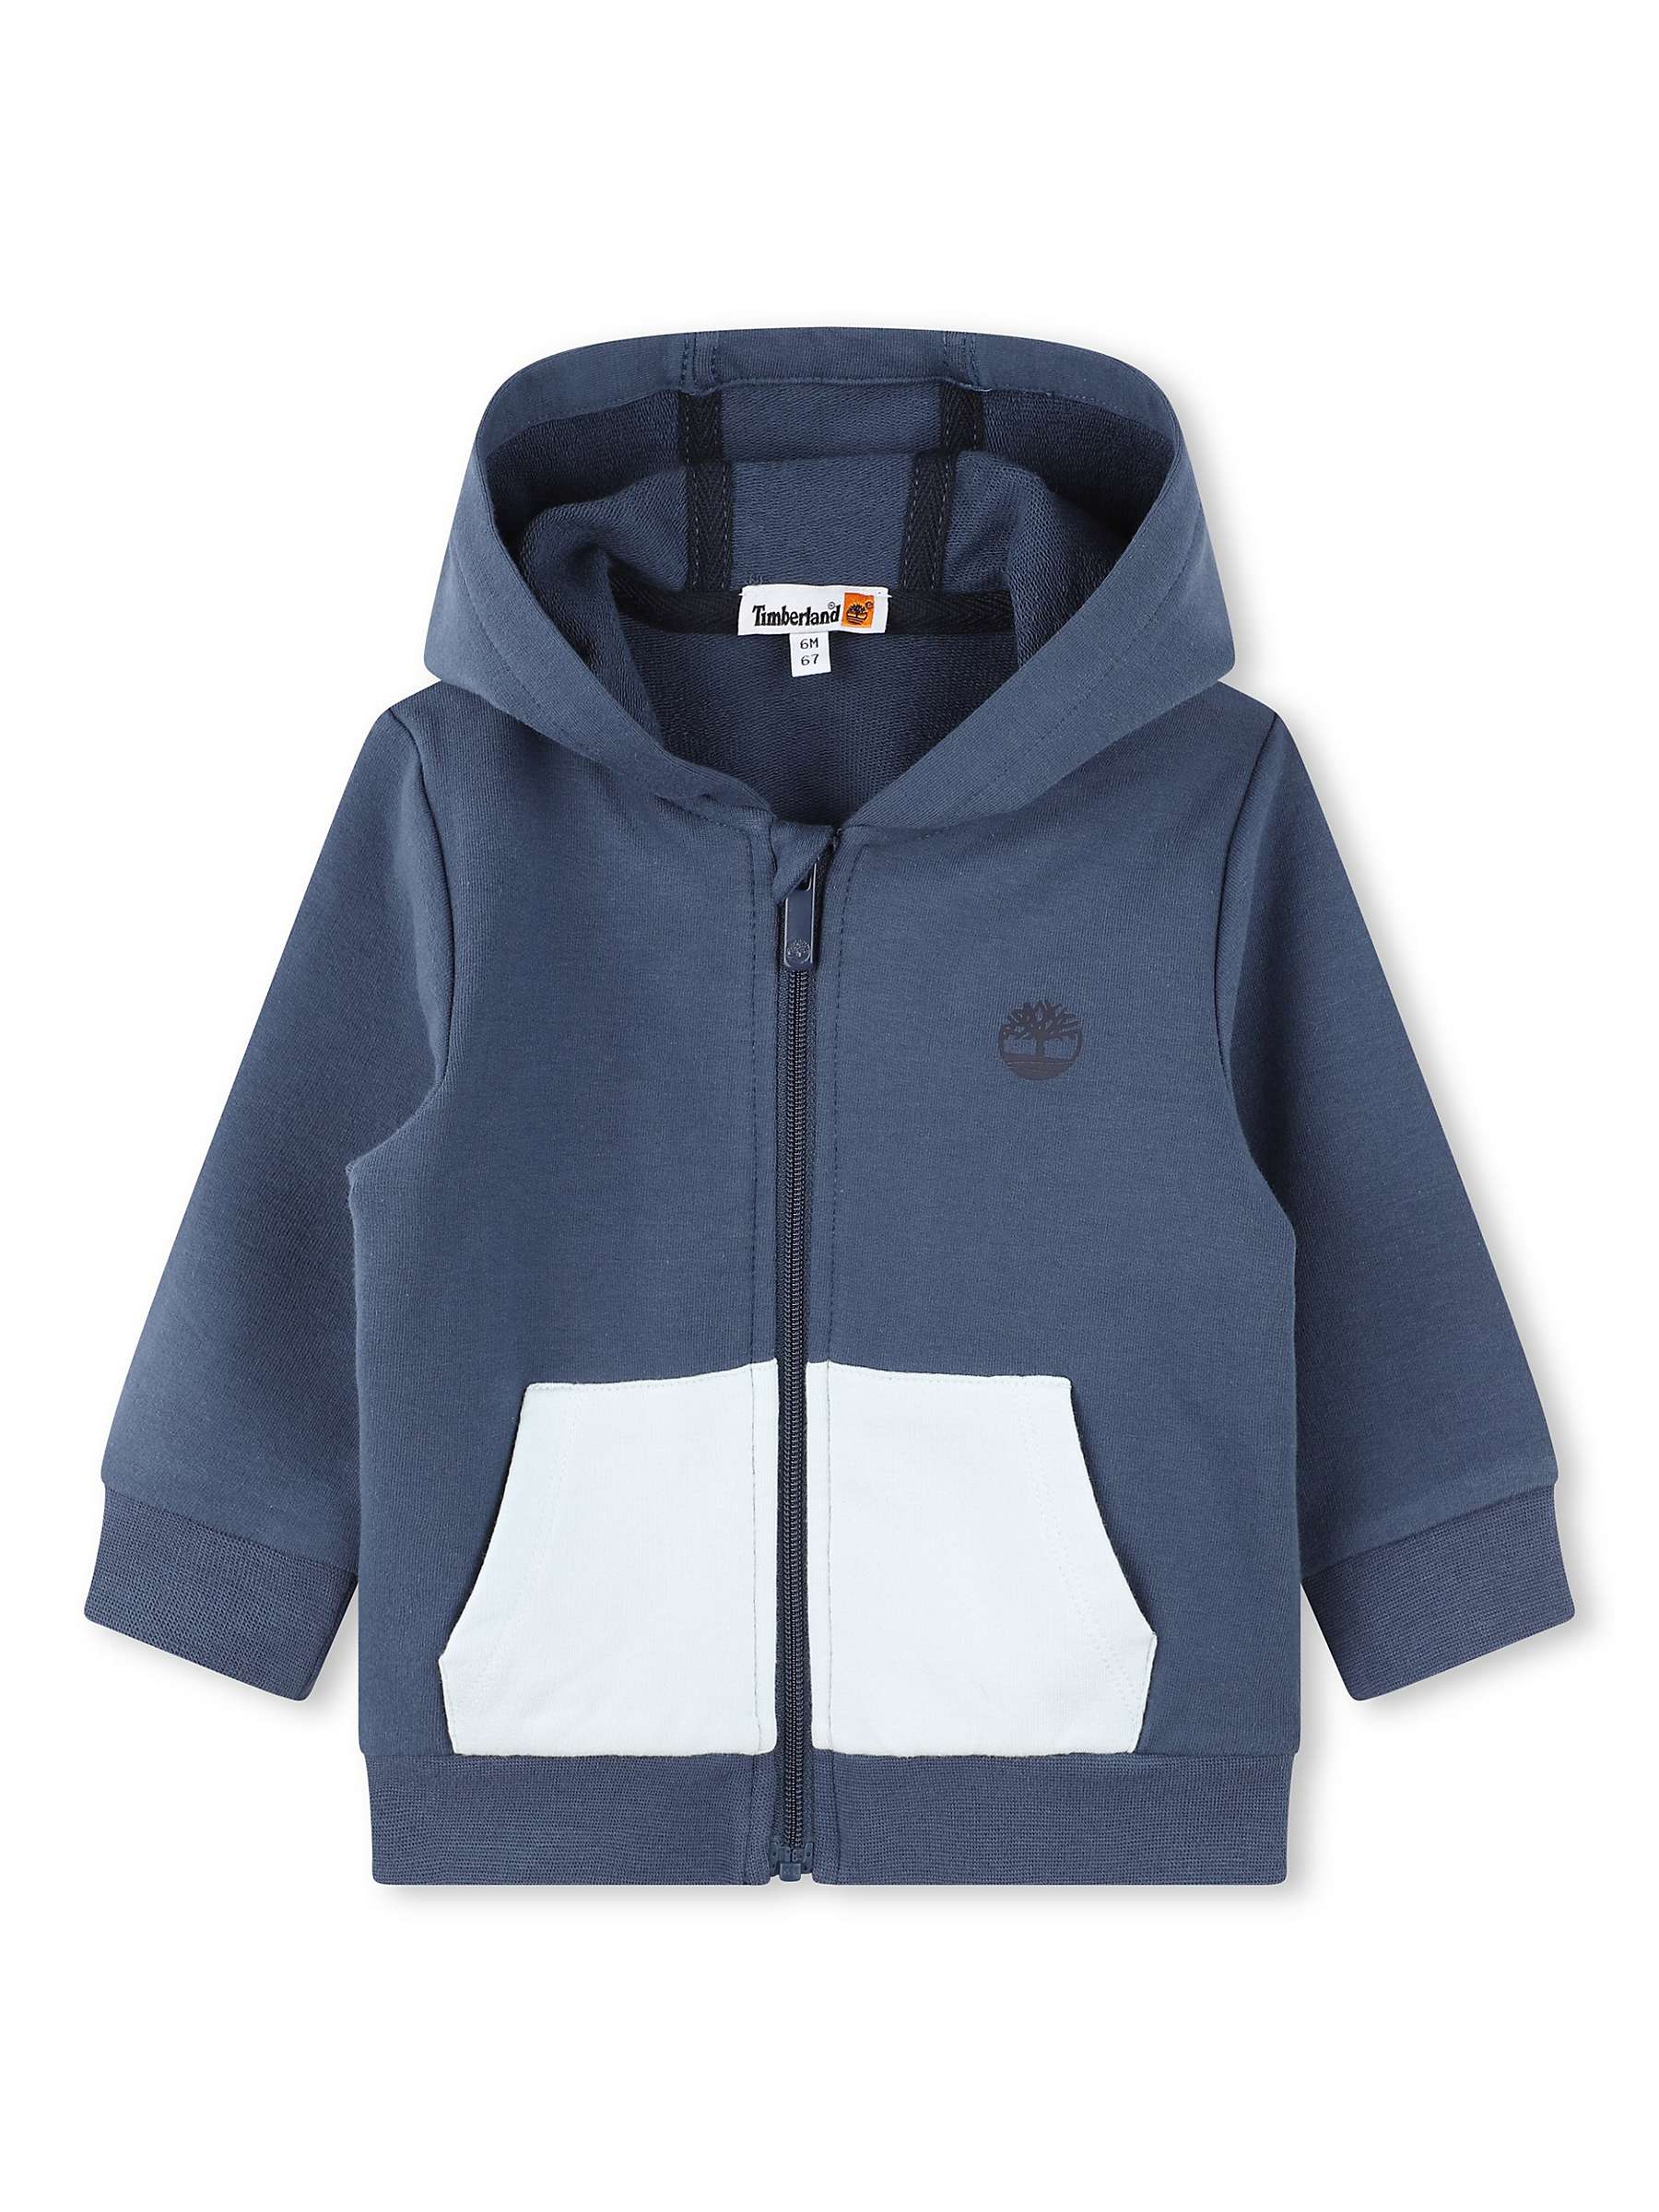 Buy Timberland Baby Colour Block Hooded Cardigan, Navy/White Online at johnlewis.com